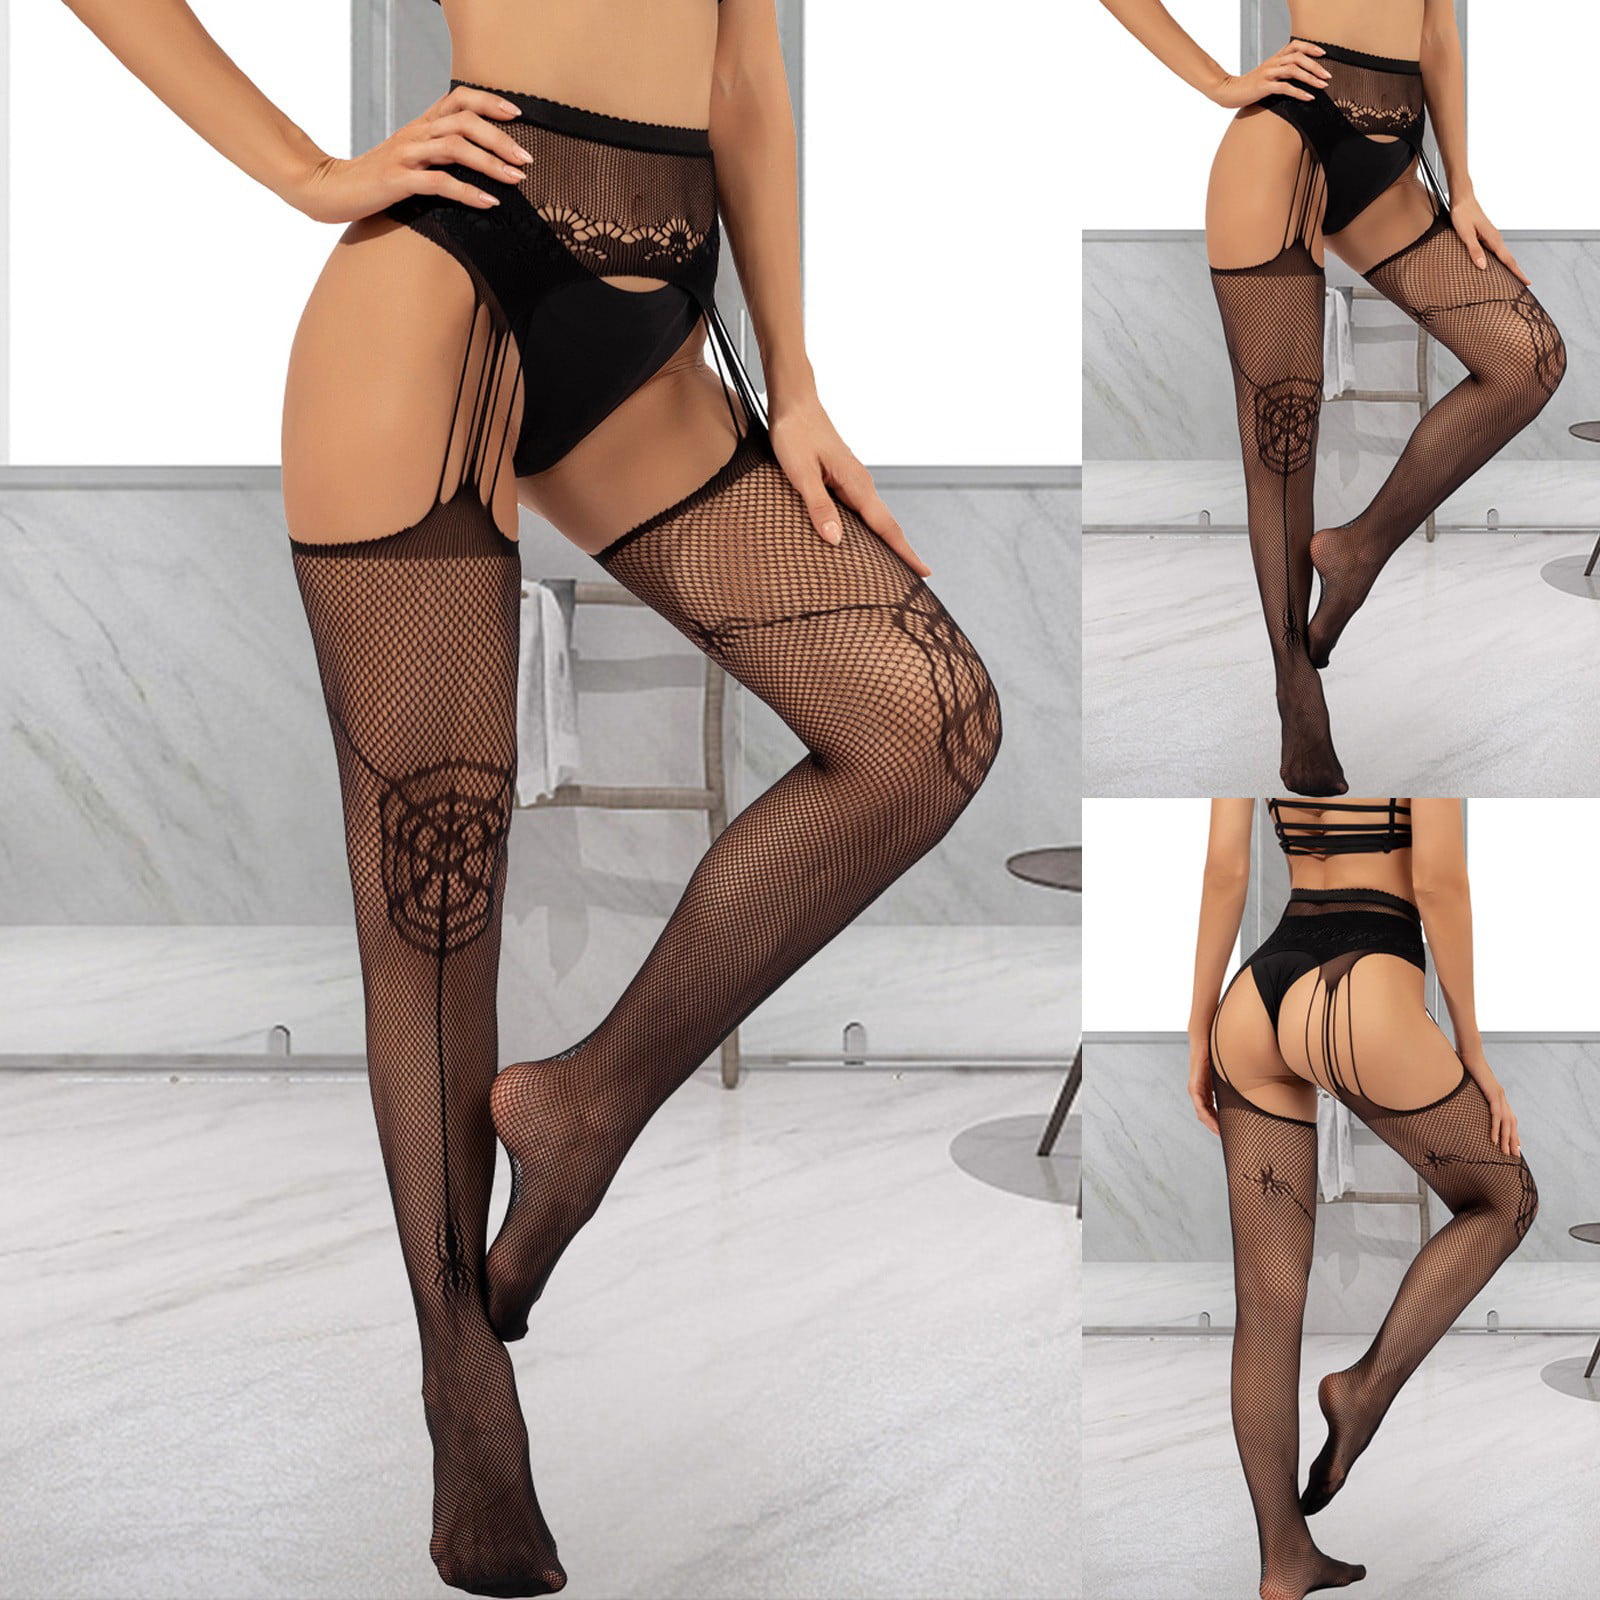 Women Black Stockings With Belt Set High Tights Lingerie Pantyhose Floral  Print Long Mesh Lace Stocking D